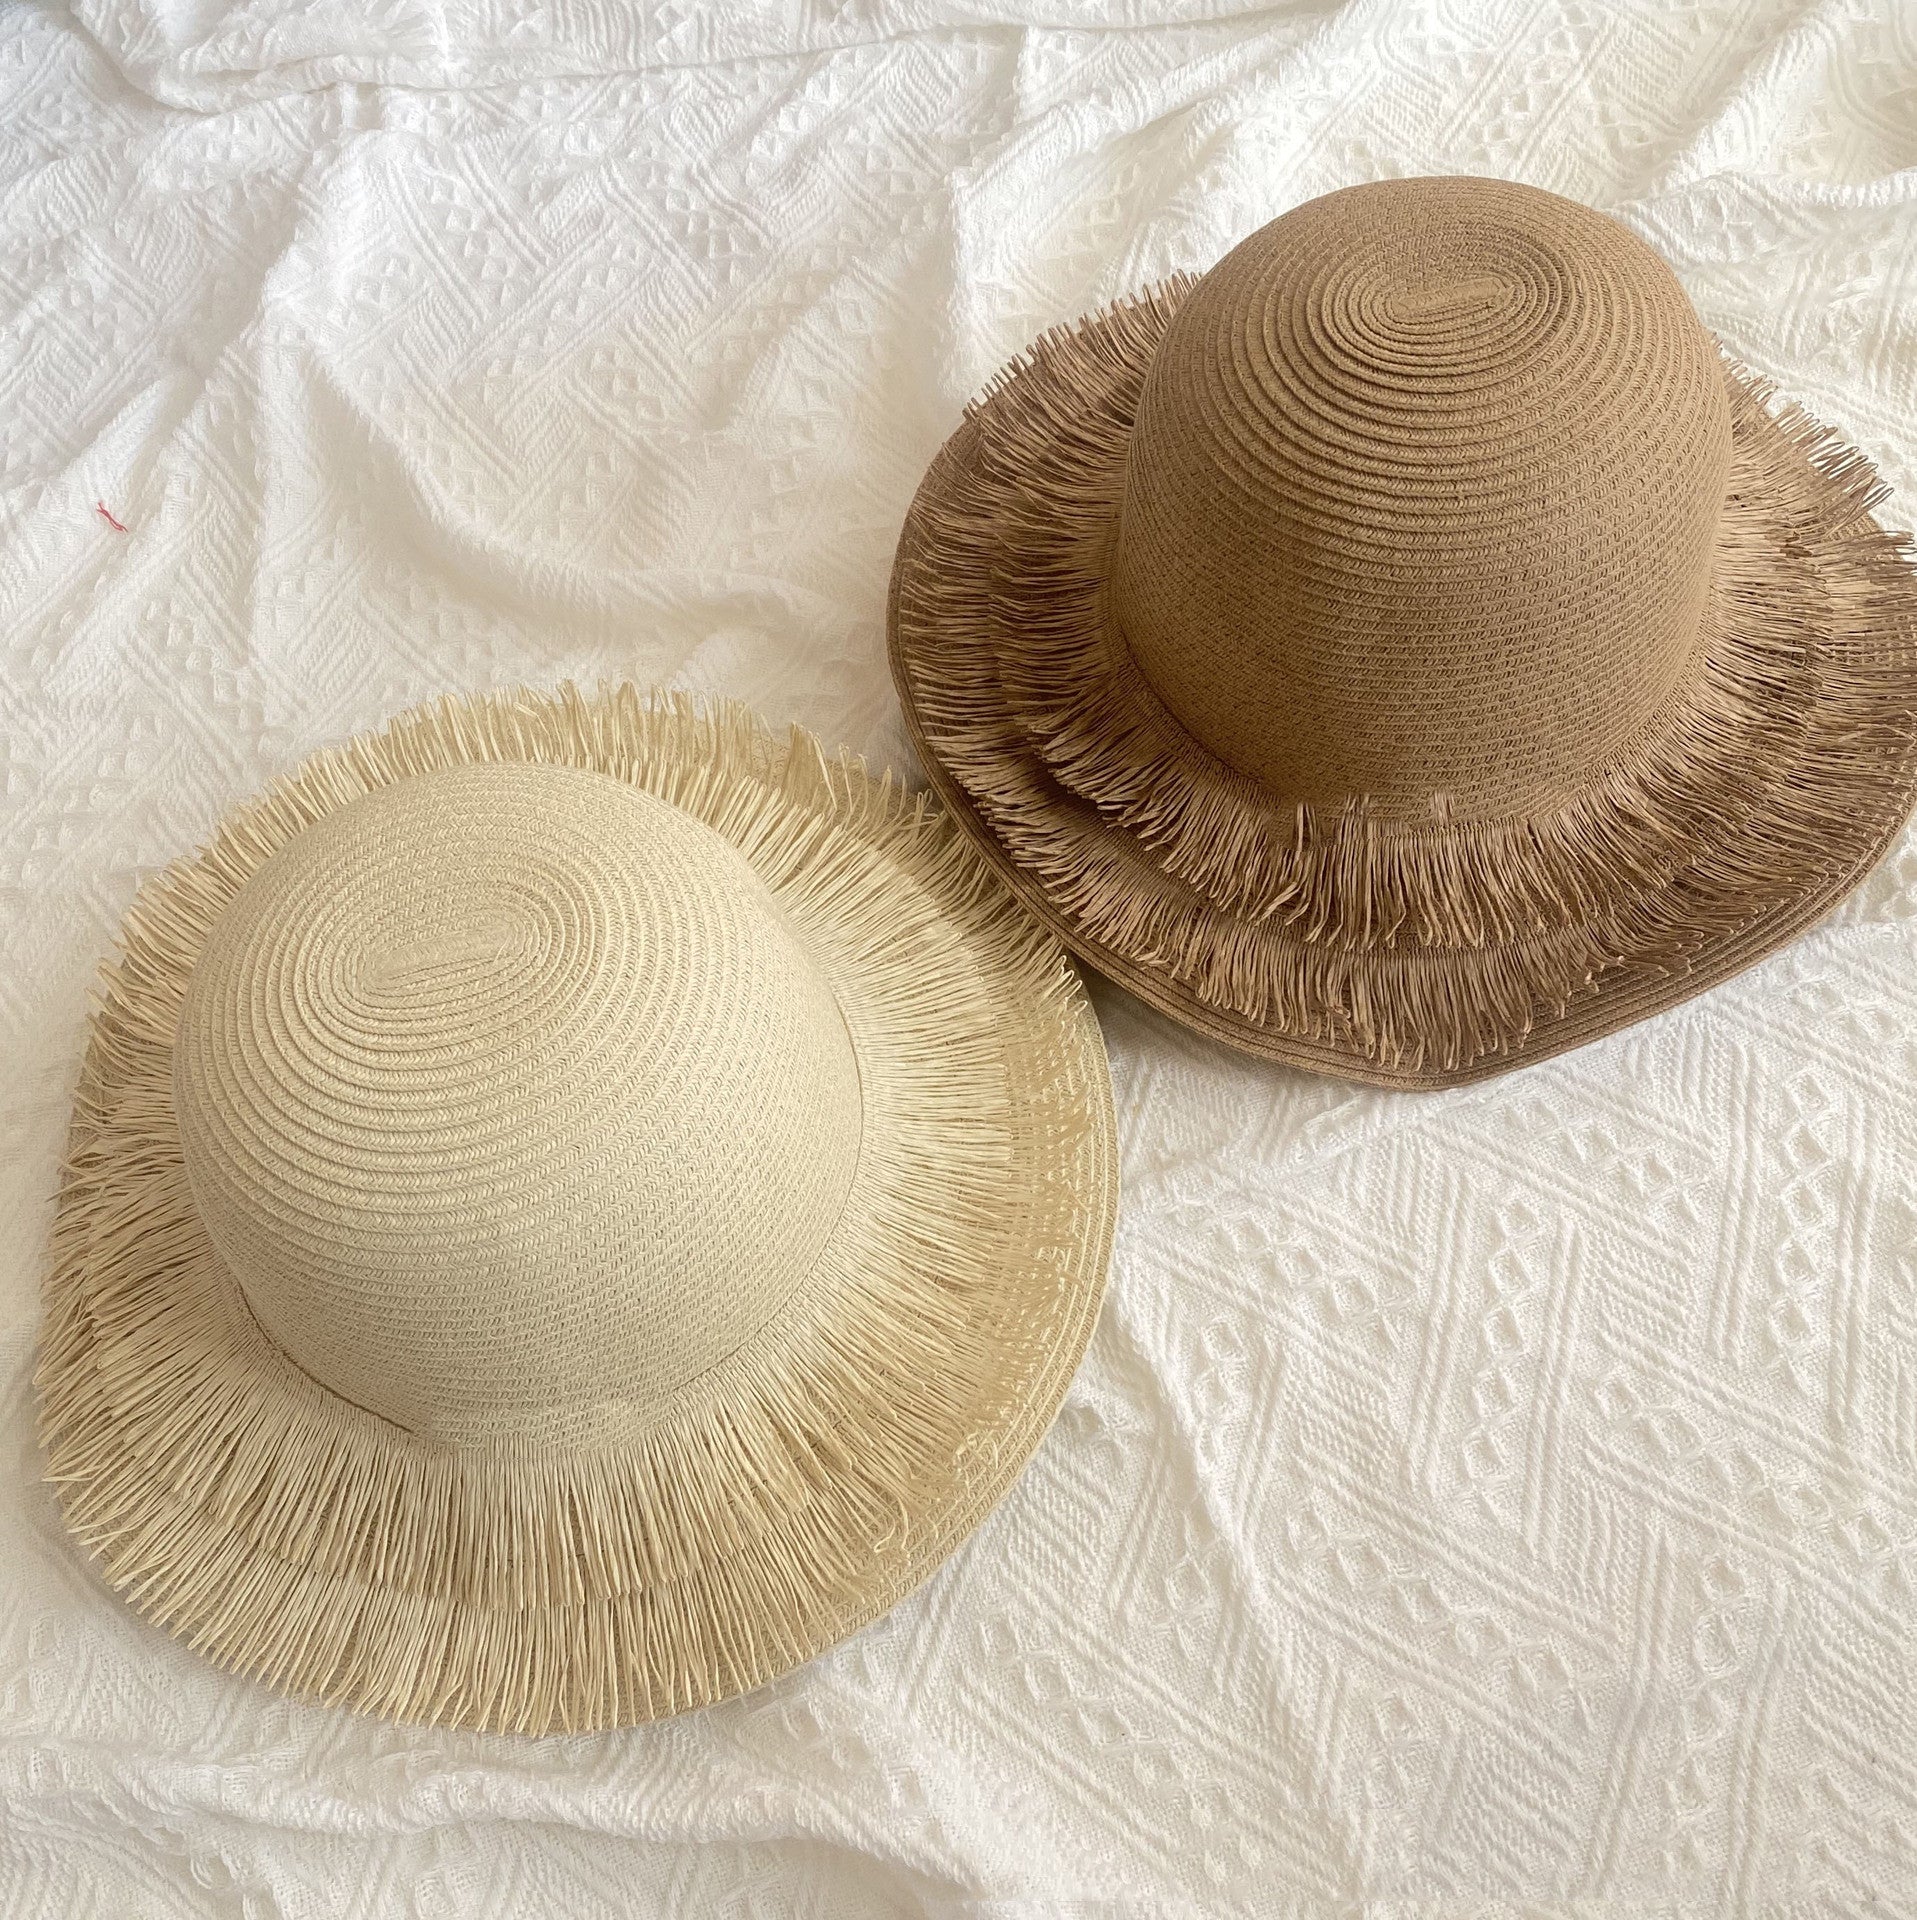 Two Fringed Designed Seaside Beach Straw Hats by Beachy Cover Ups on a white bed.